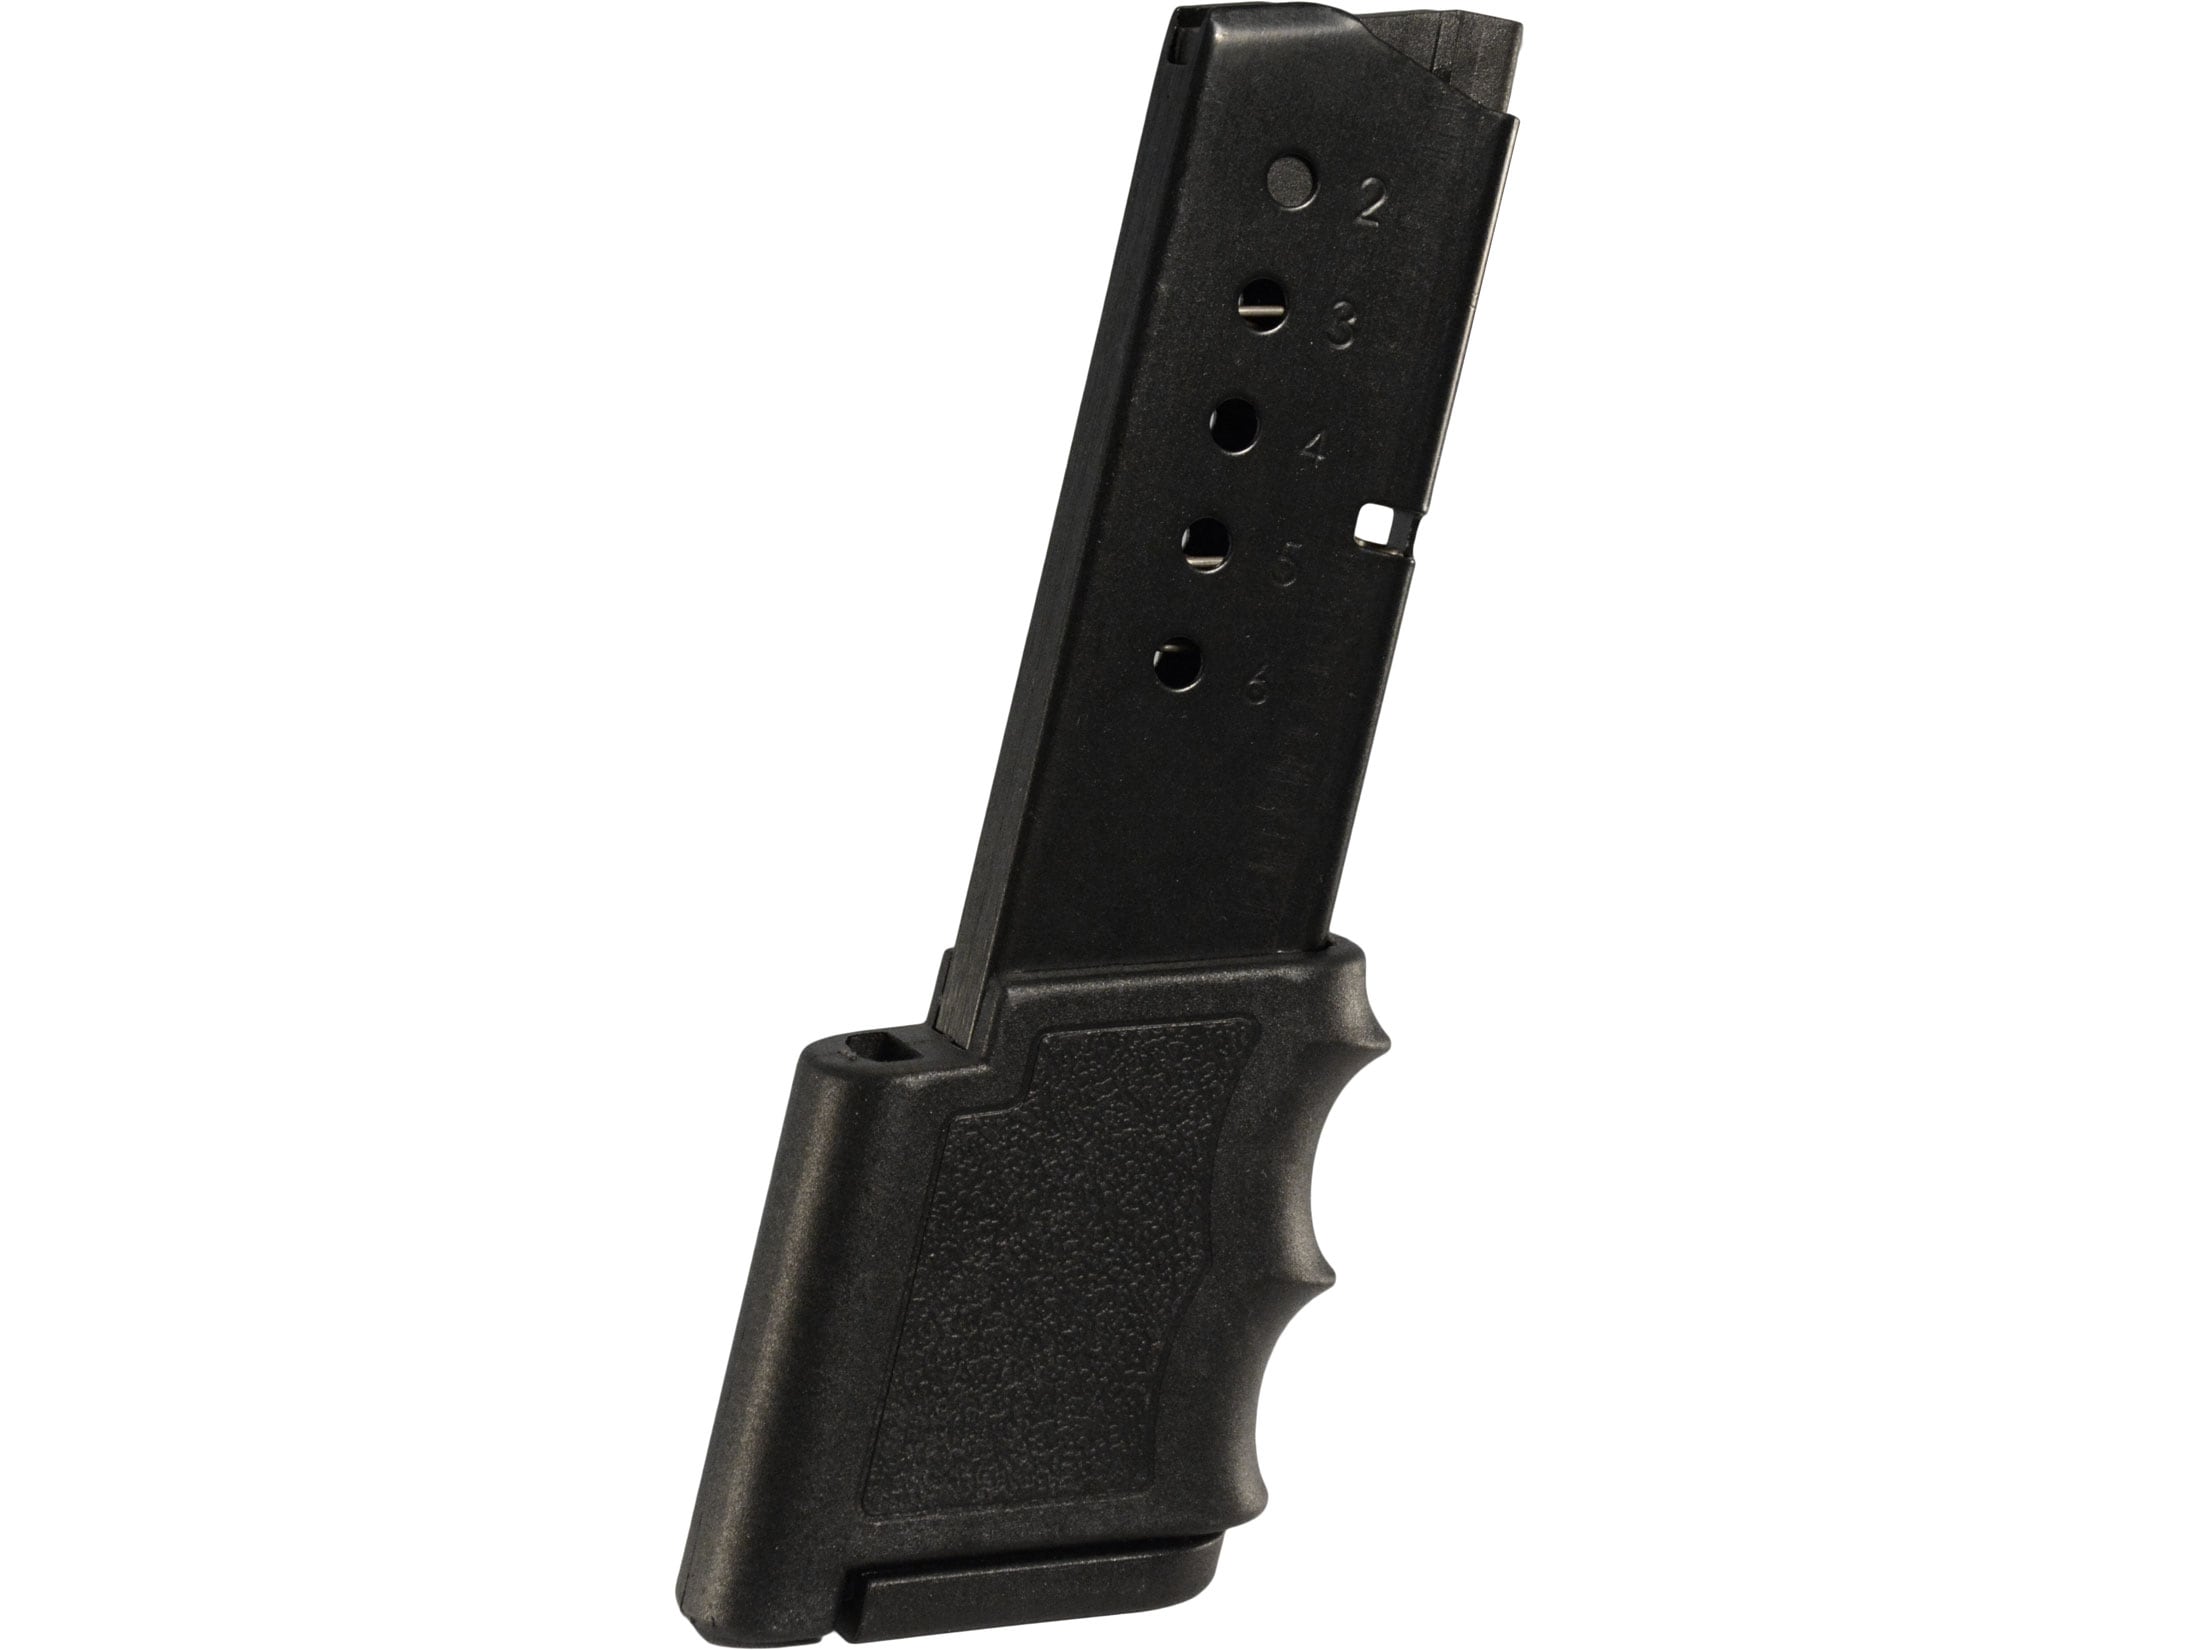 MAGAZINE W/FINGER REST LOT #1444 NEW SMITH & WESSON BODYGUARD .380 ACP 6 RD 